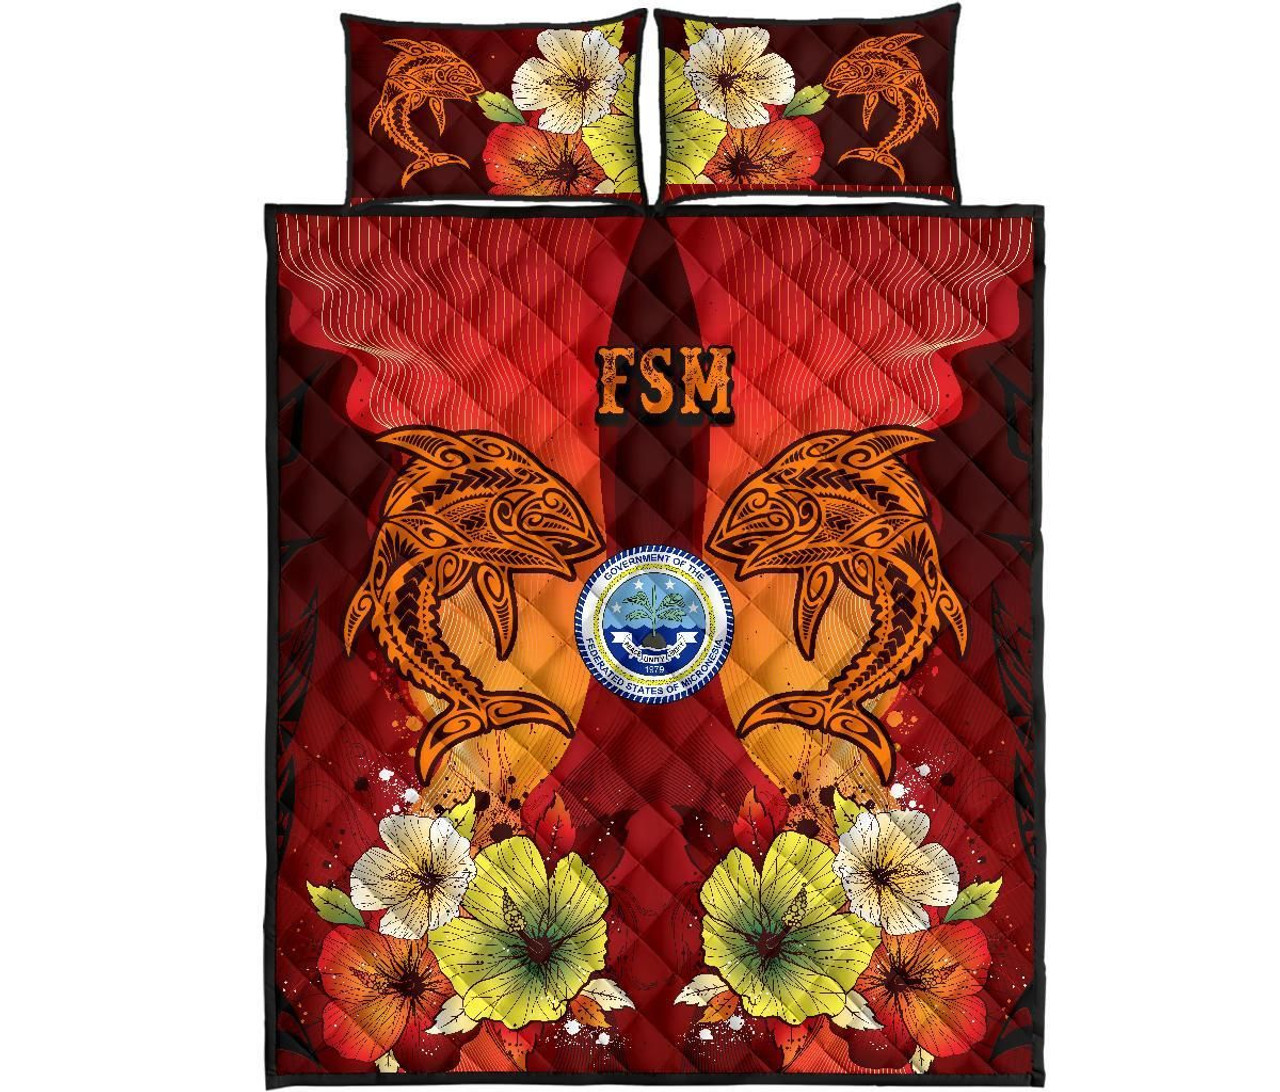 Federated States Of Micronesia Quilt Bed Sets - Tribal Tuna Fish 2